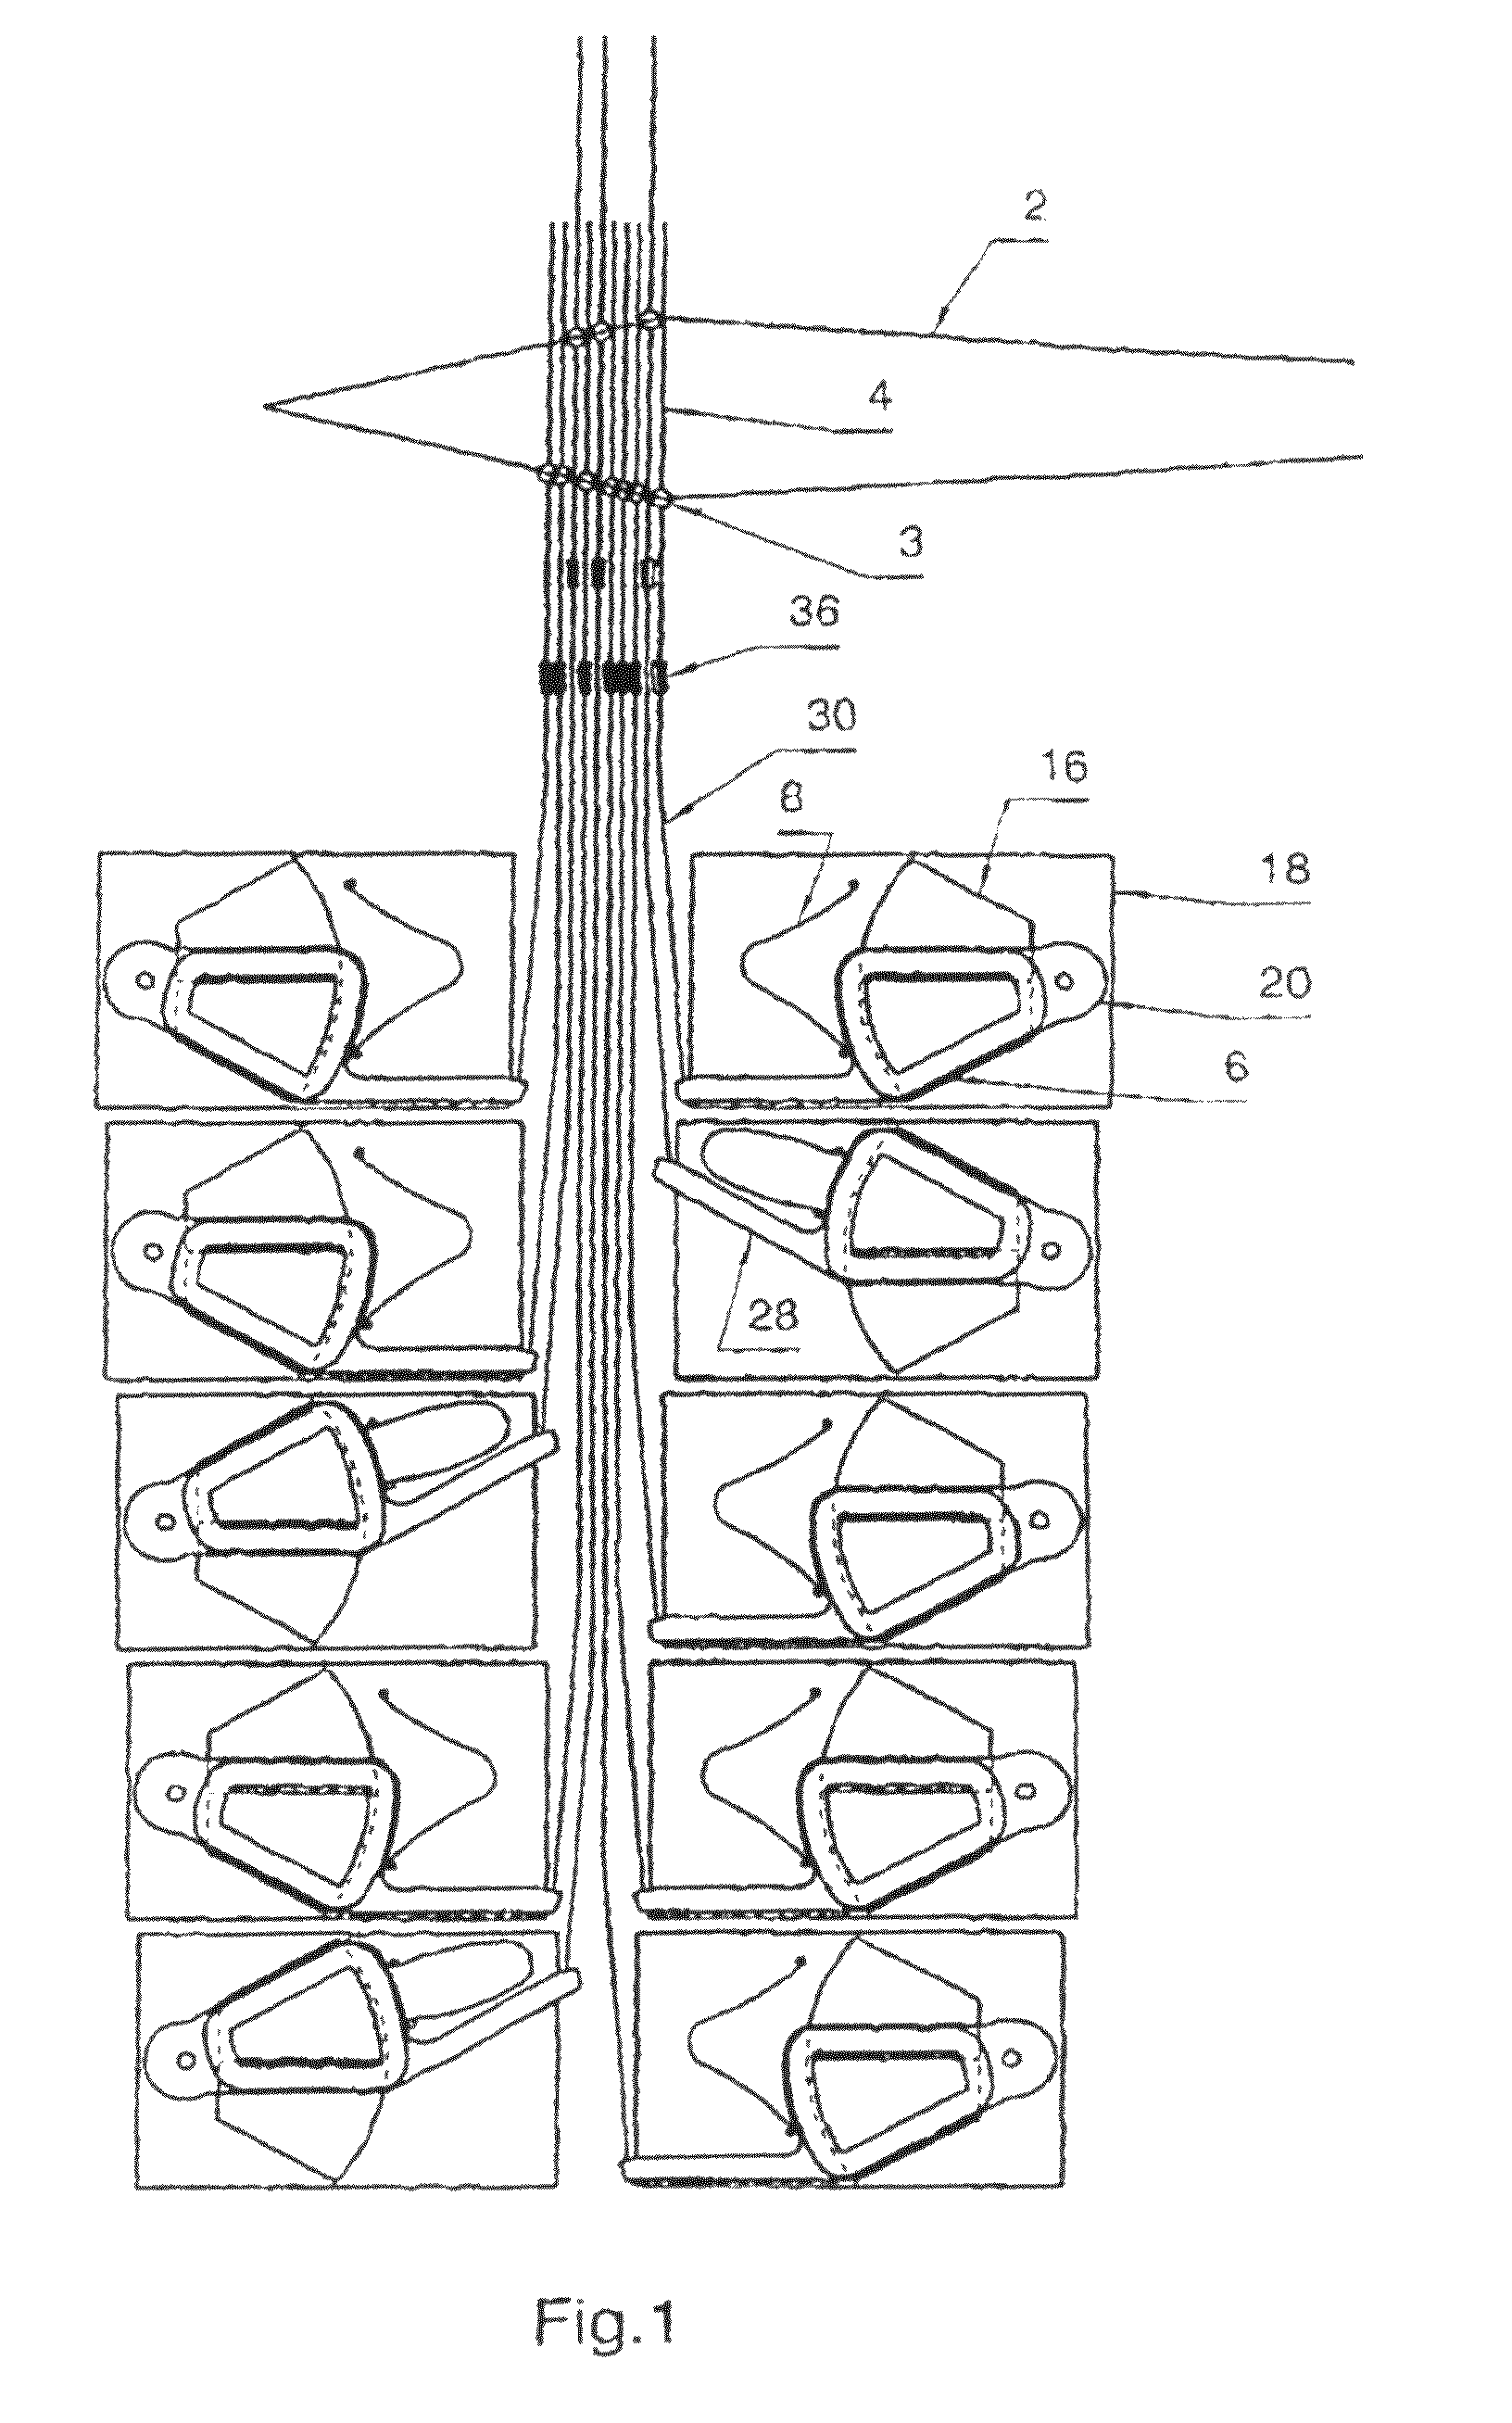 Device for controlling the transverse movement of the warp threads of a textile weaving machine